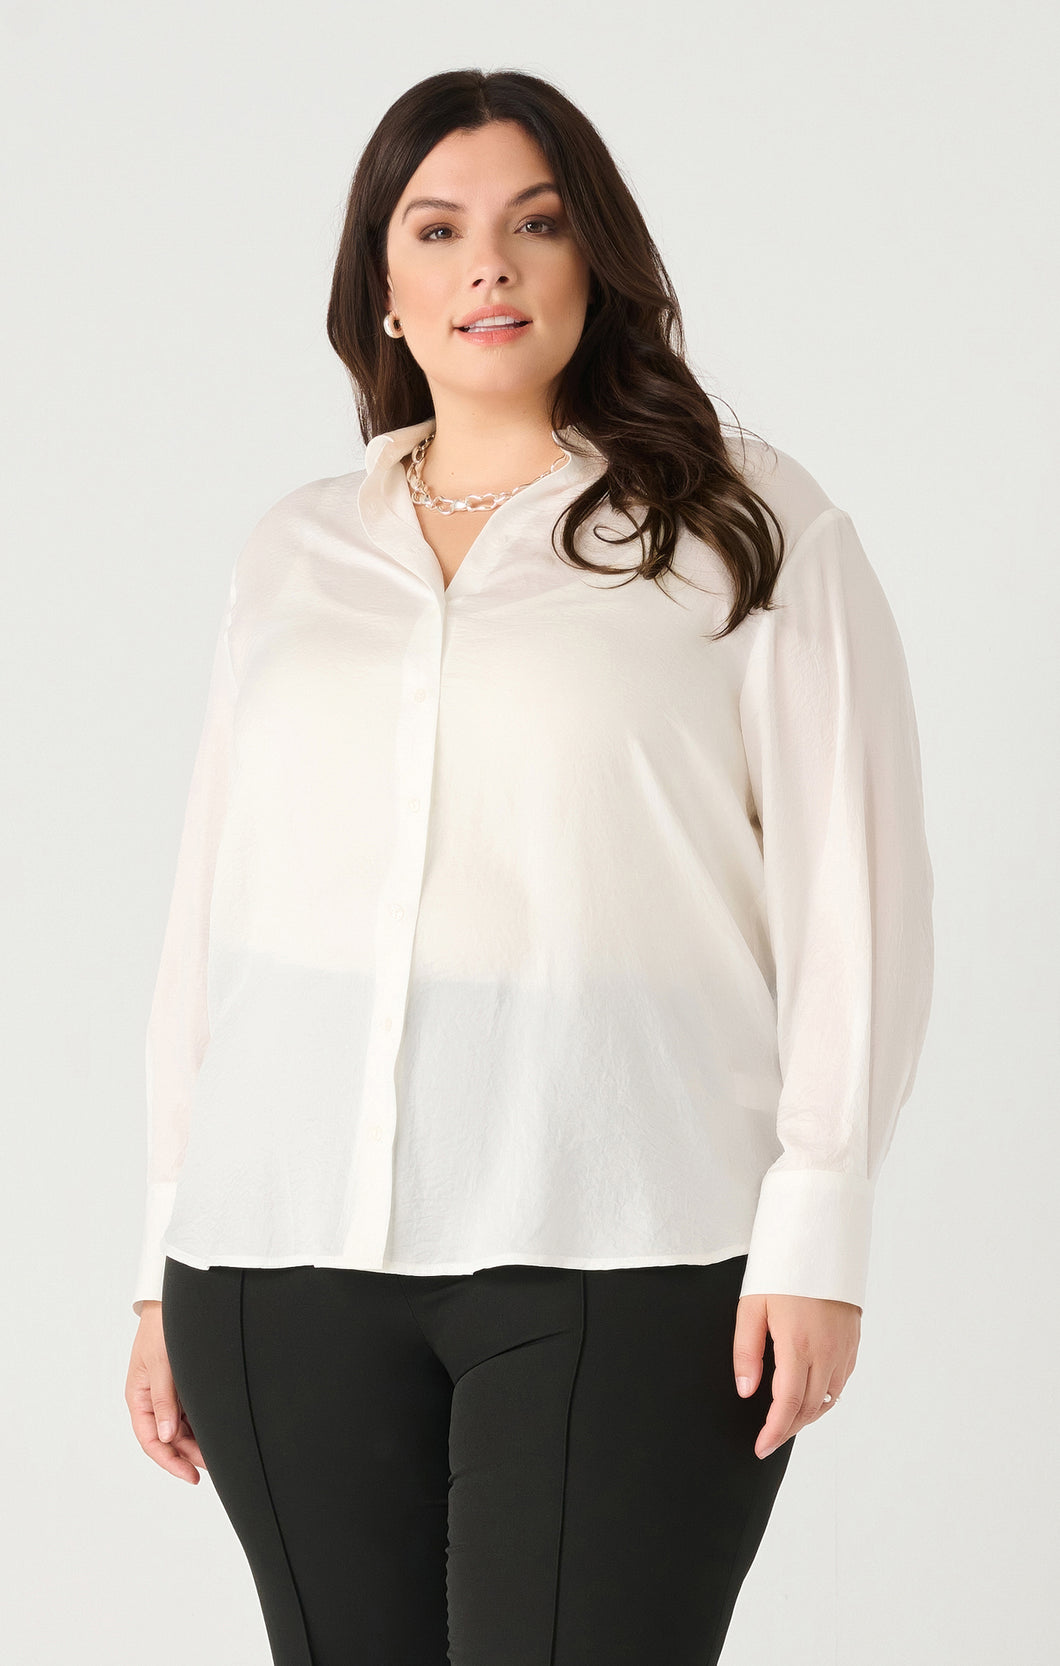 TEXTURED WHITE BLOUSE by Dex (available in plus sizes)